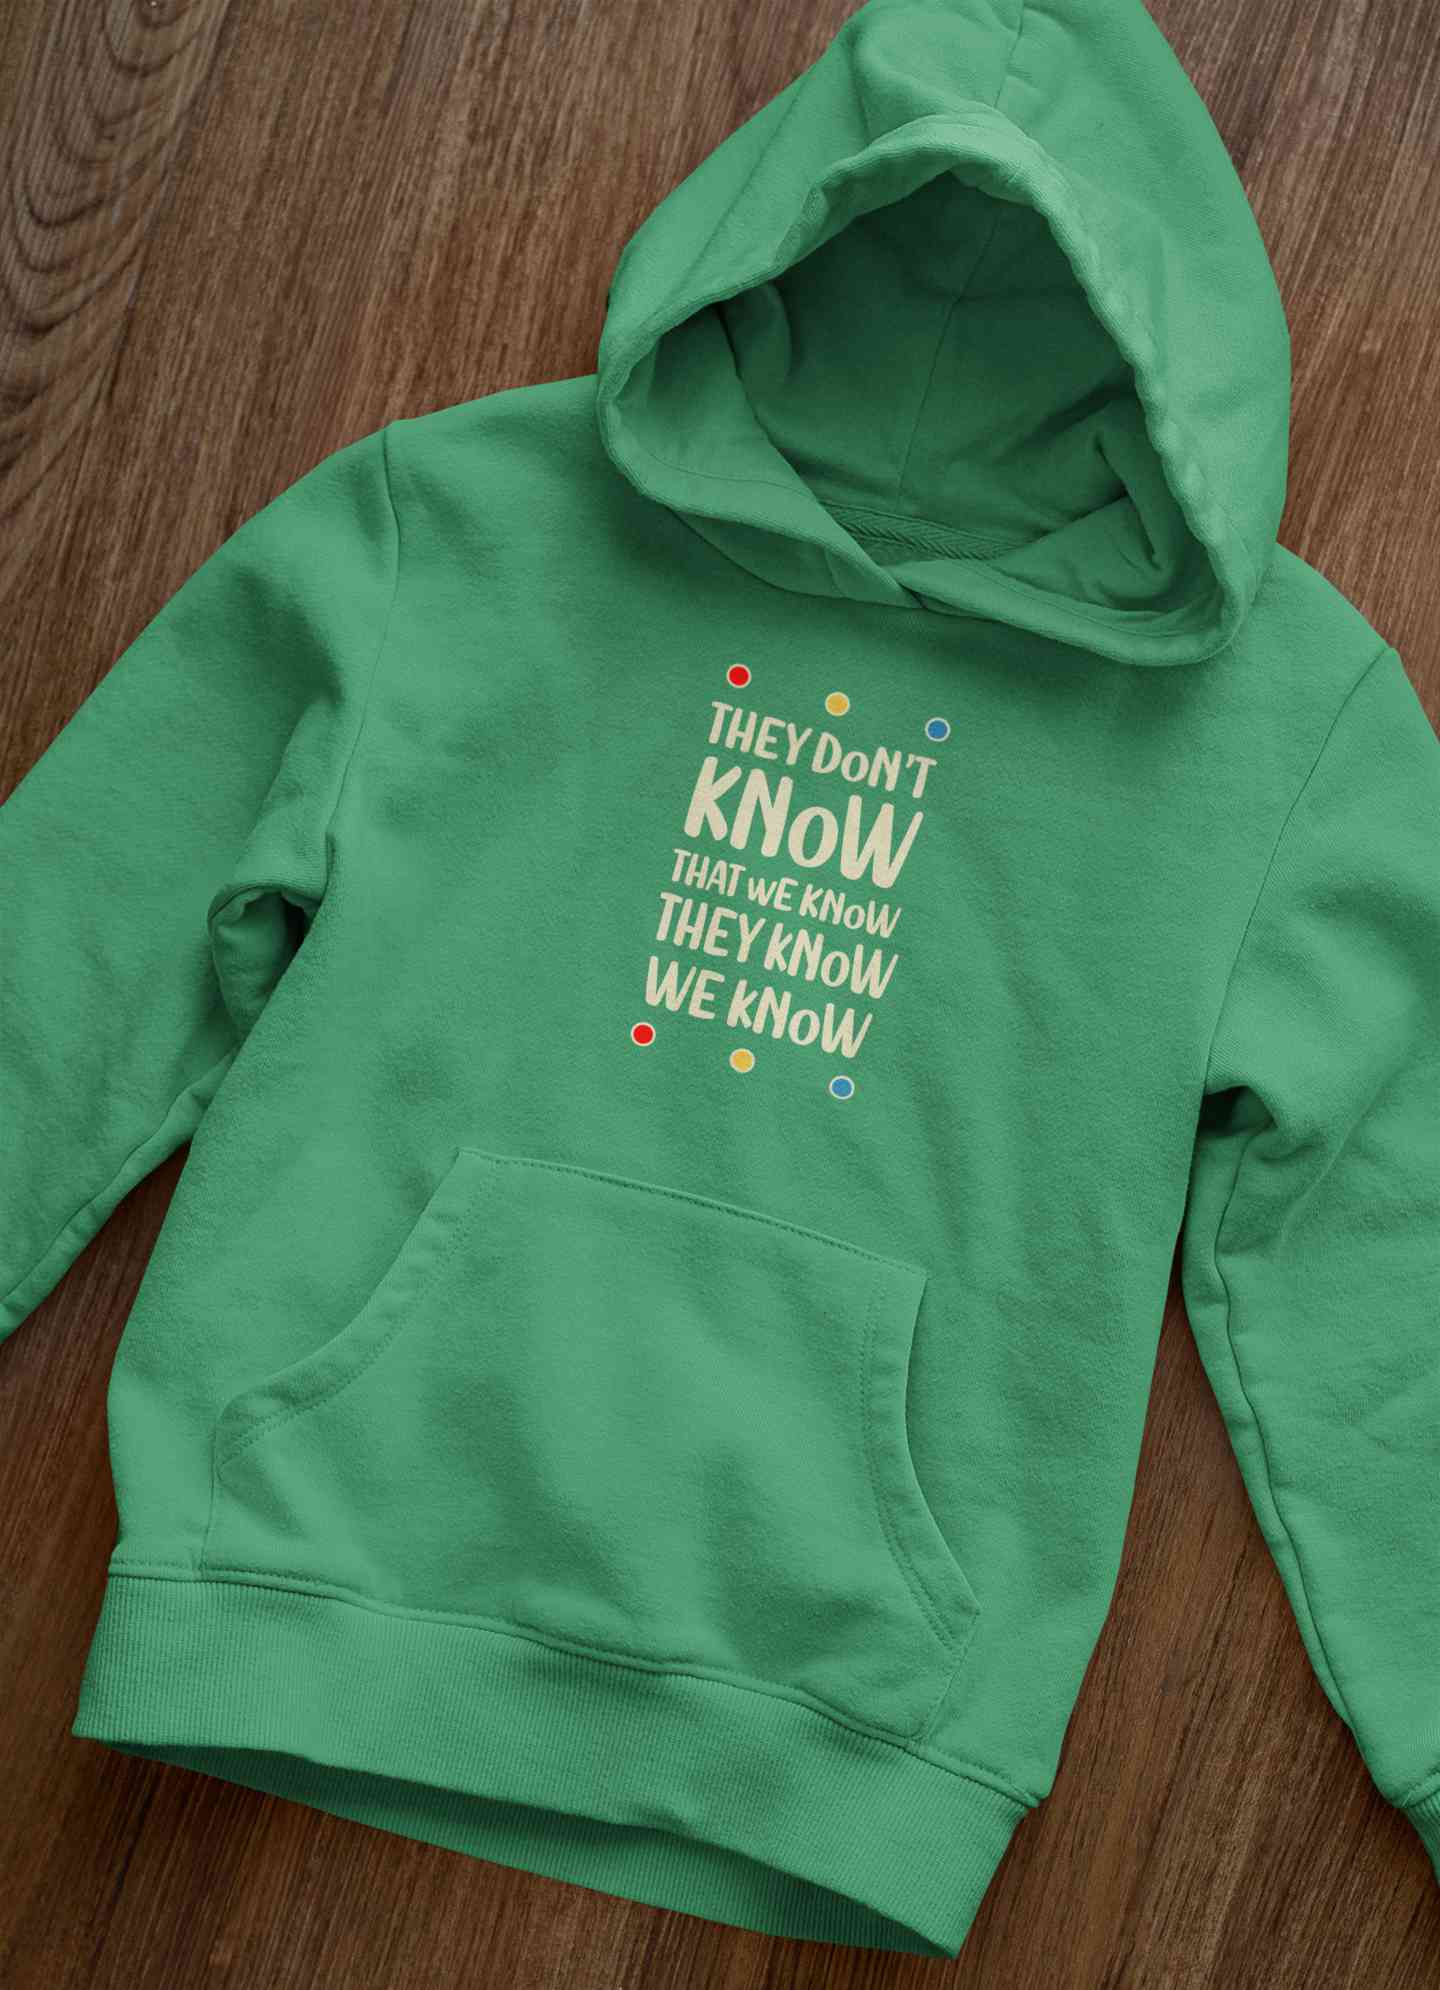 They Do not Know Typography Hoodies for Women-FunkyTeesClub